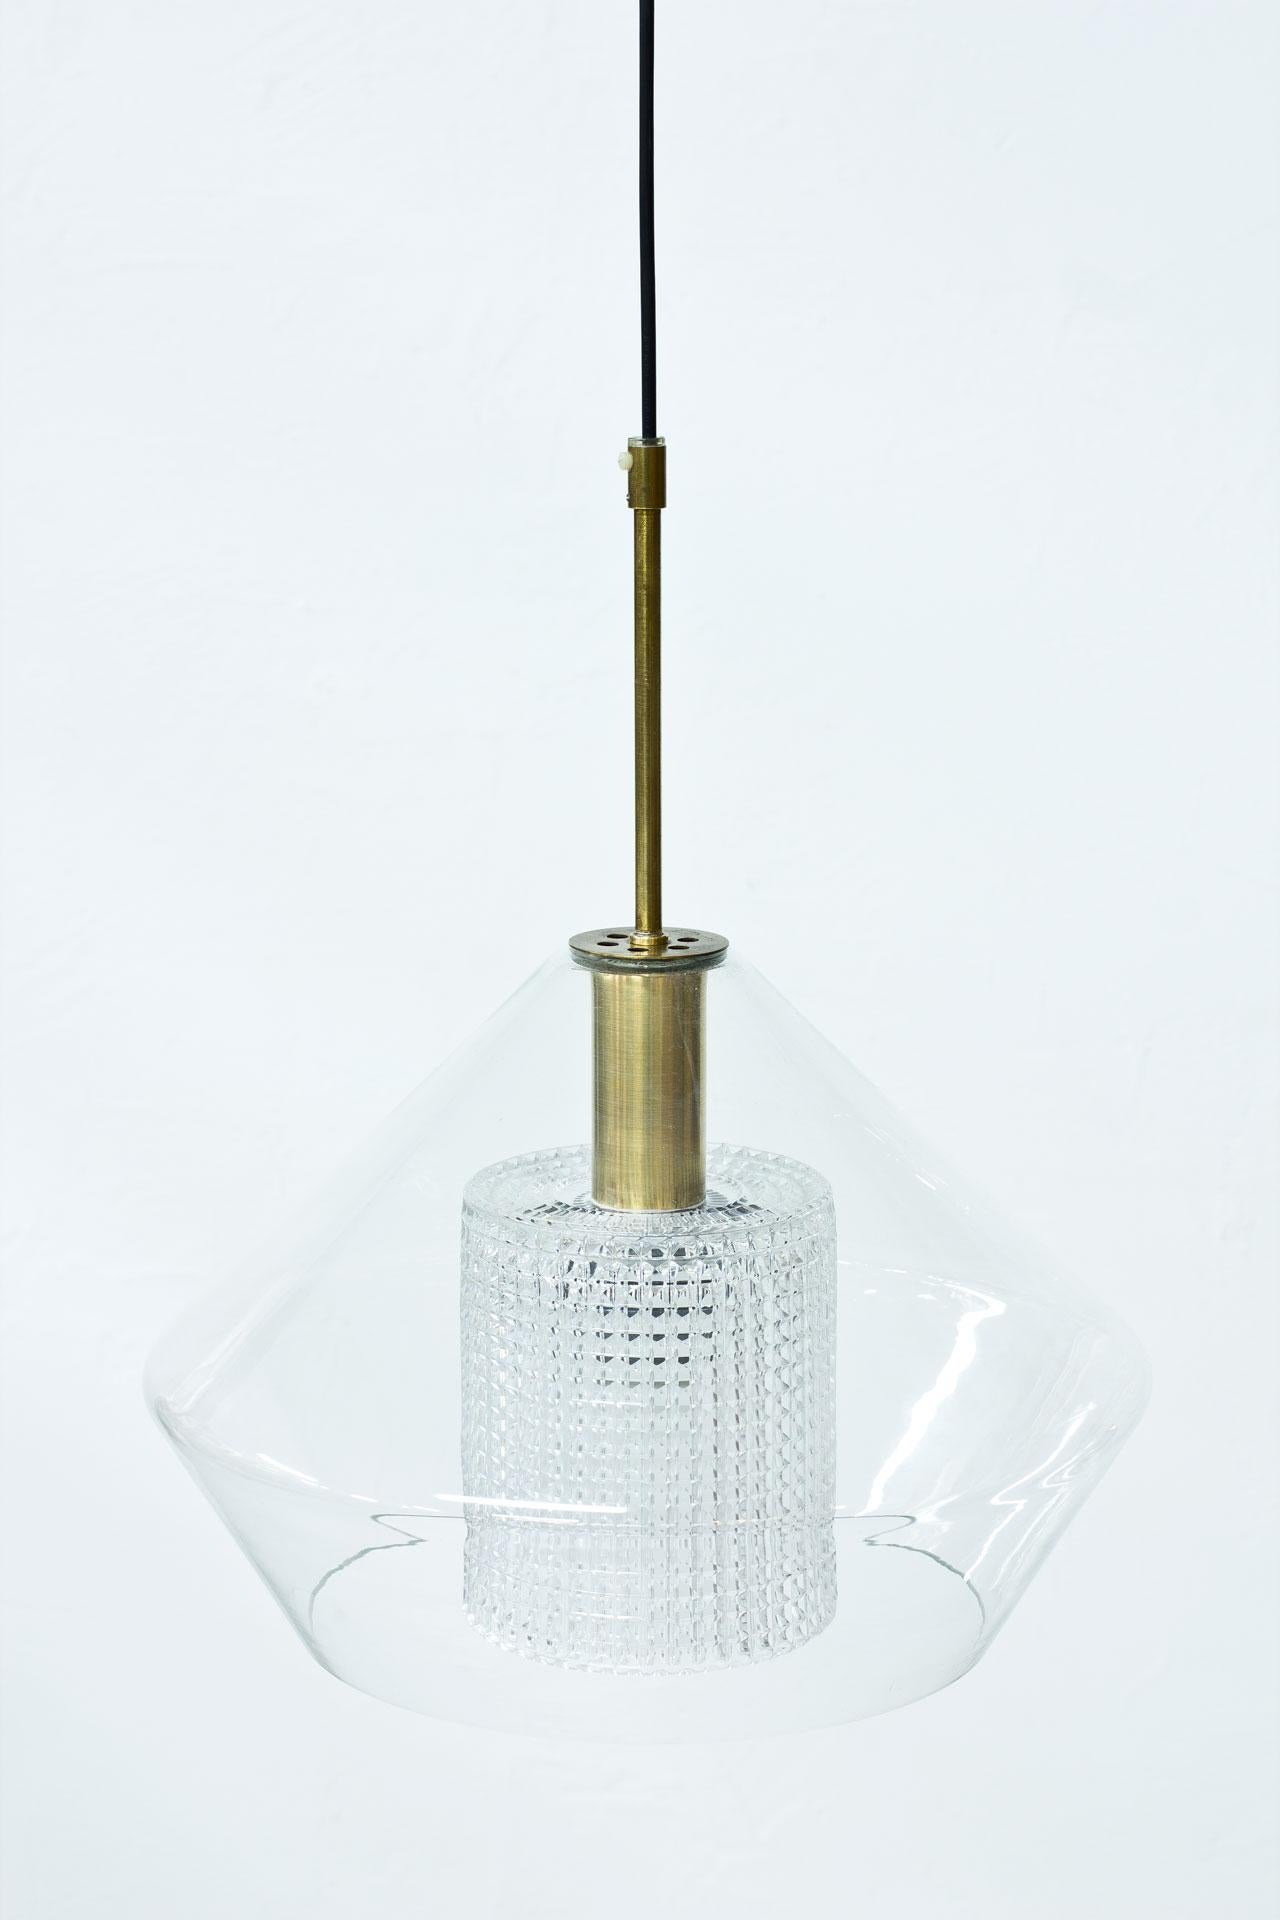 Pendant lamp designed by Carl Fagerlund for glass company Orrefors.
Manufactured in Sweden during the 1960s. 
Outer cup in clear glass with a cylindrical diffuser in clear pressed glass. 
Brass fittings with new electricity.